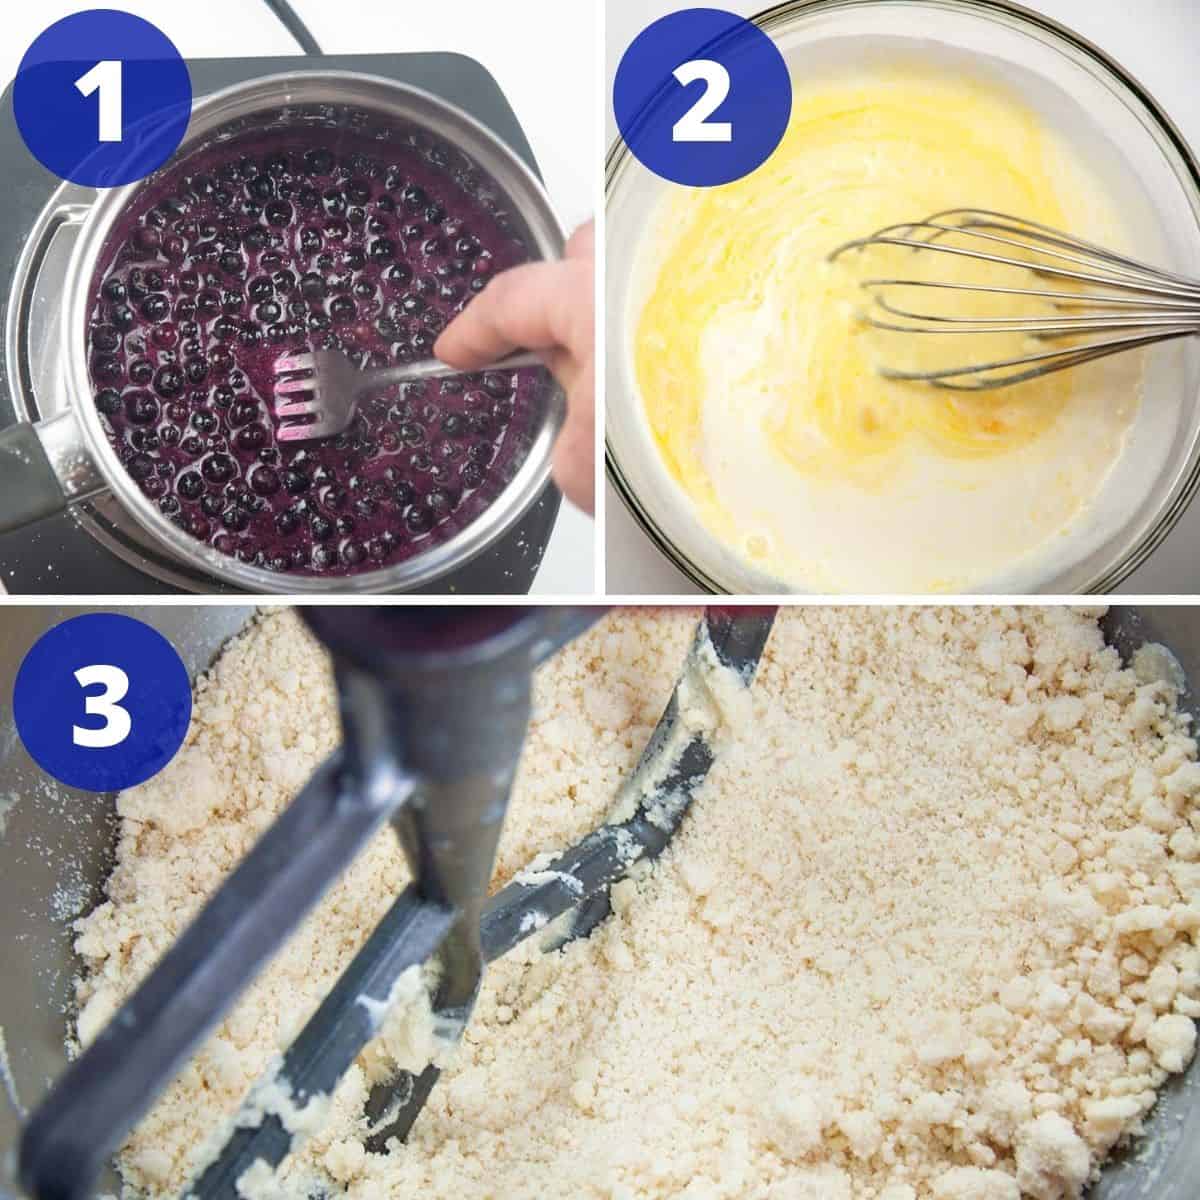 Mixing blueberry filling, custard, and shortbread crust.